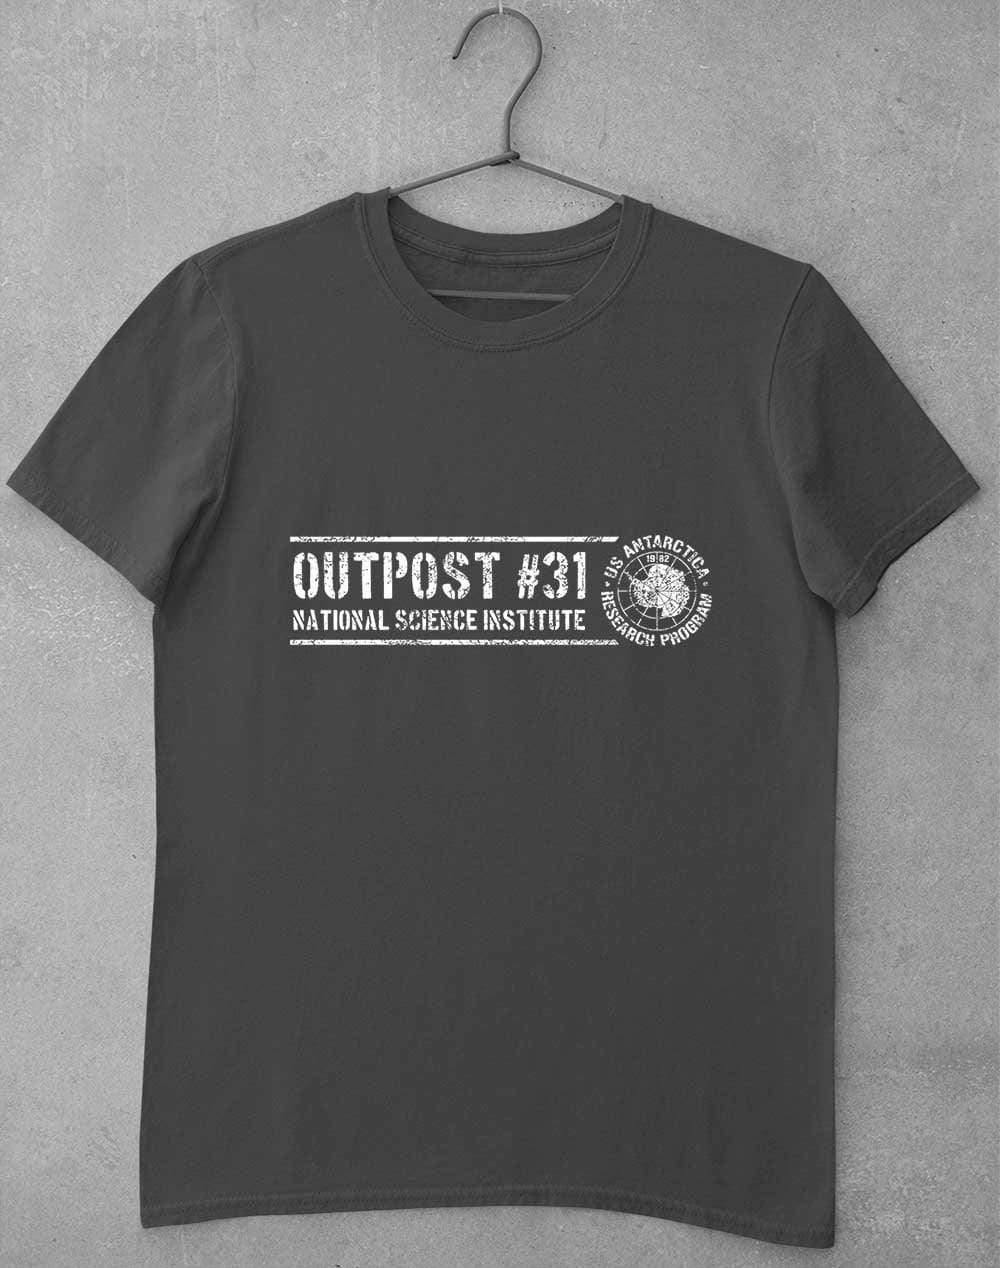 Outpost 31 Antarctica T-Shirt S / Charcoal  - Off World Tees